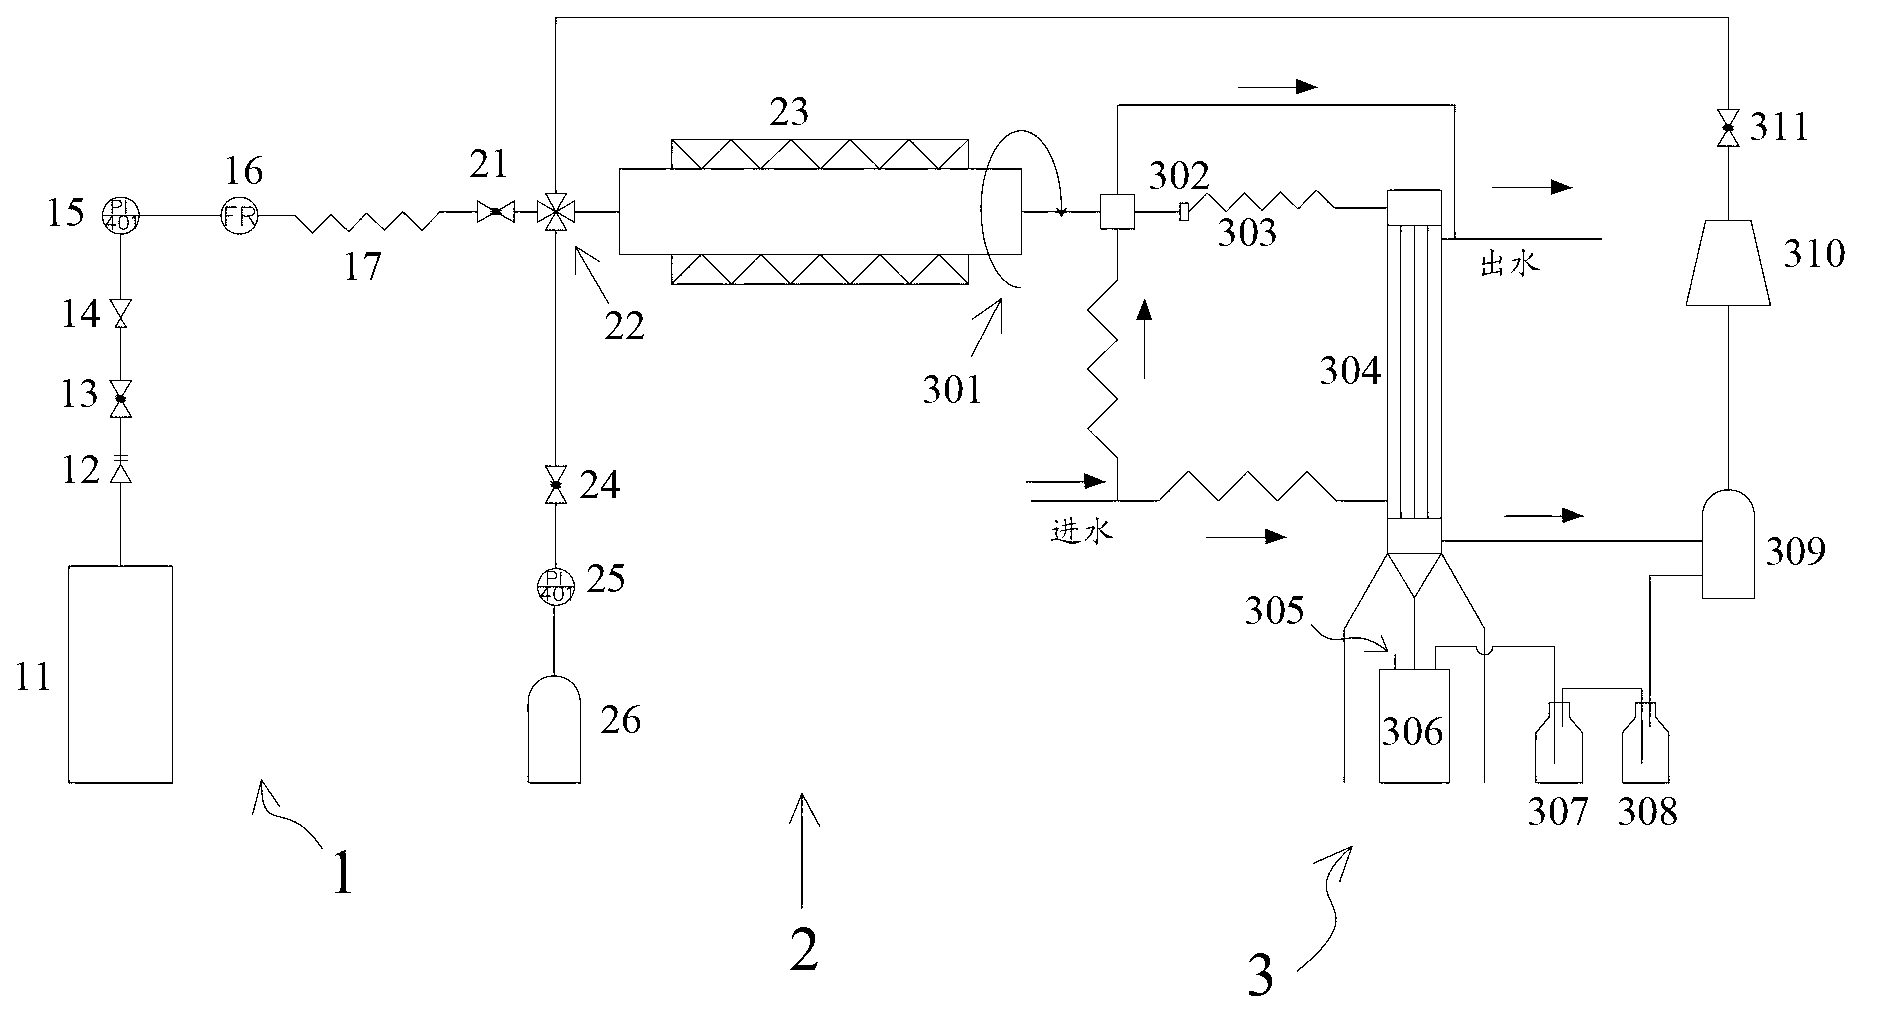 Activated carbon production equipment and method for applying the equipment to production of activate carbon, pyroligneous liquor, tar and wood gas